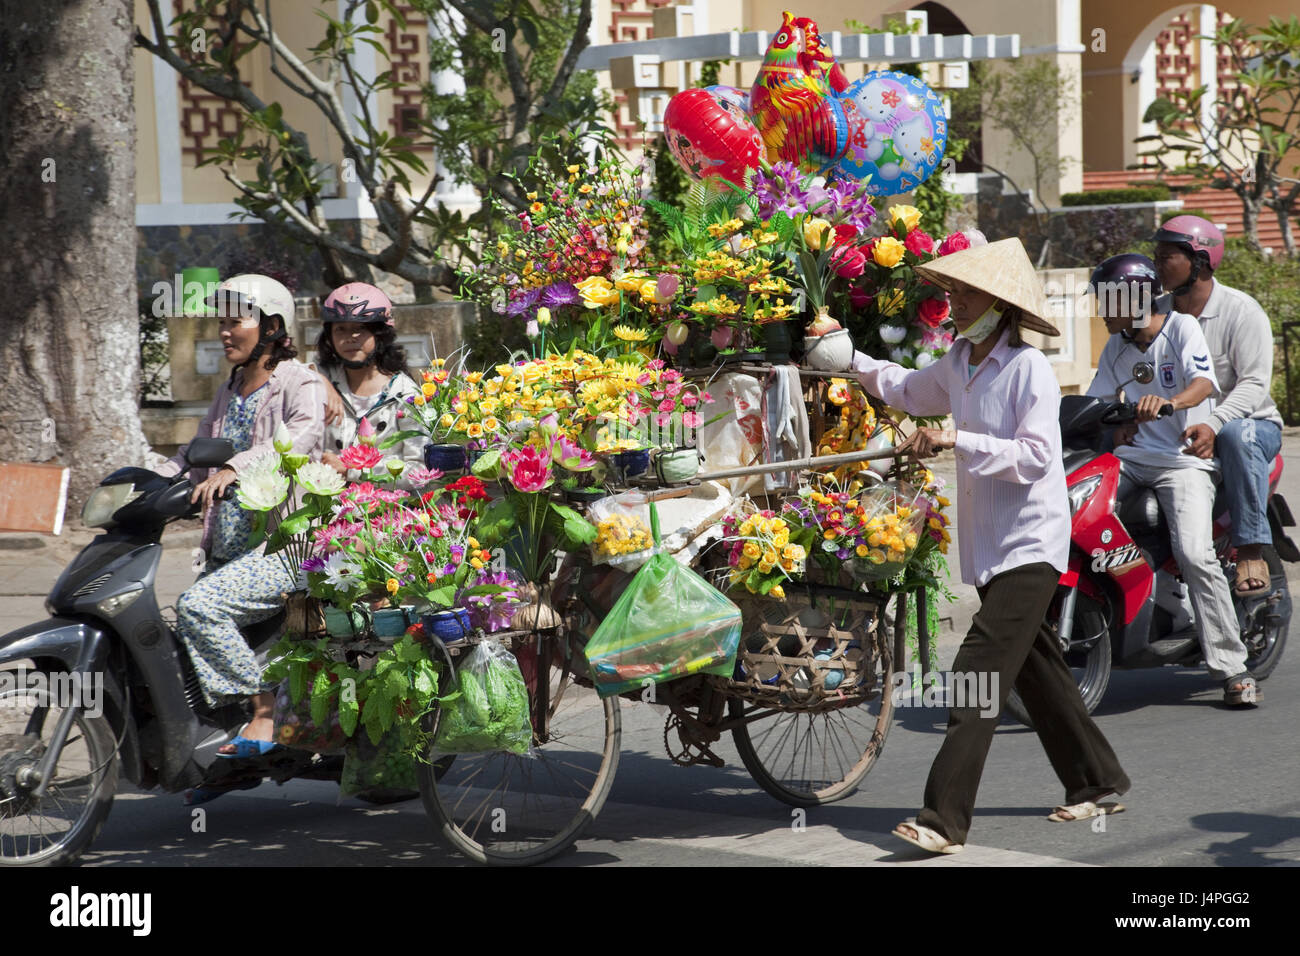 Vietnam, Hoi In, shop assistant, bicycle, artificial flowers, no model release, Stock Photo